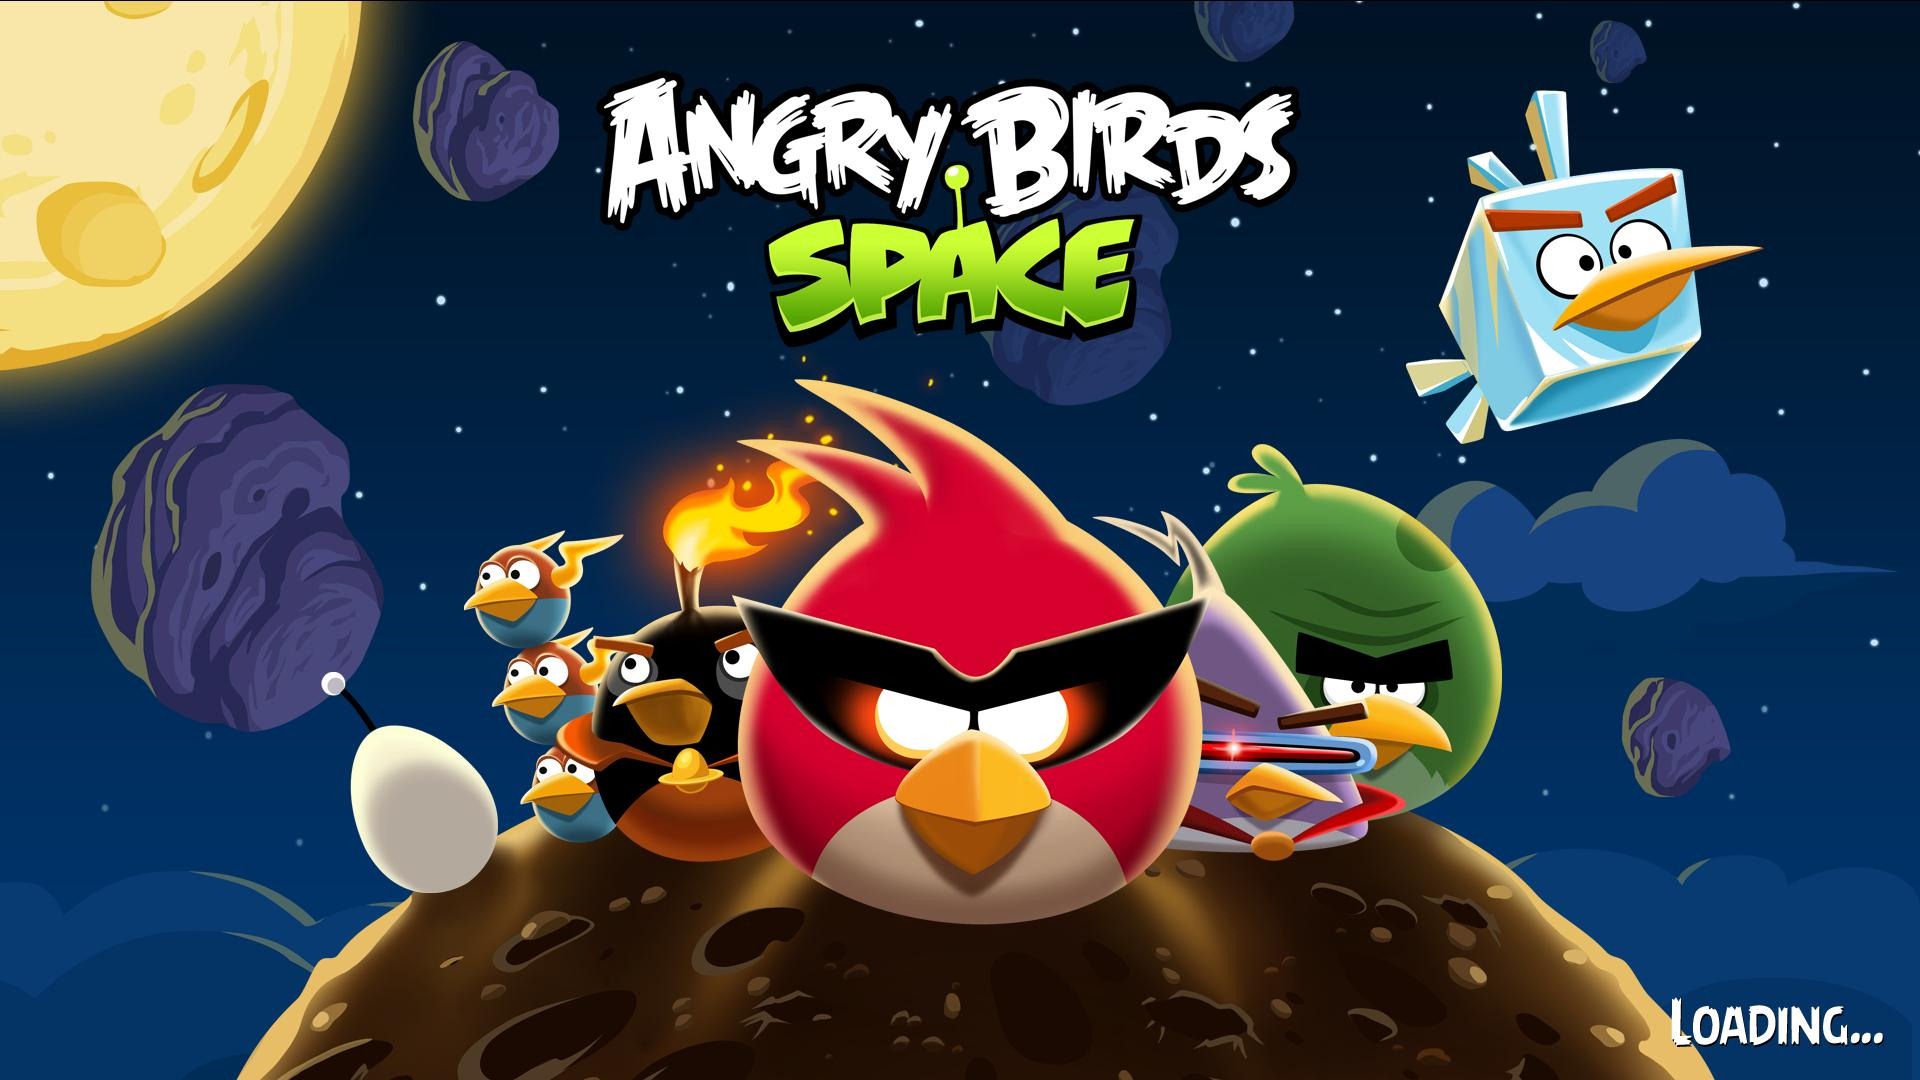 Angry Birds Game Wallpapers #1 - 1920x1080